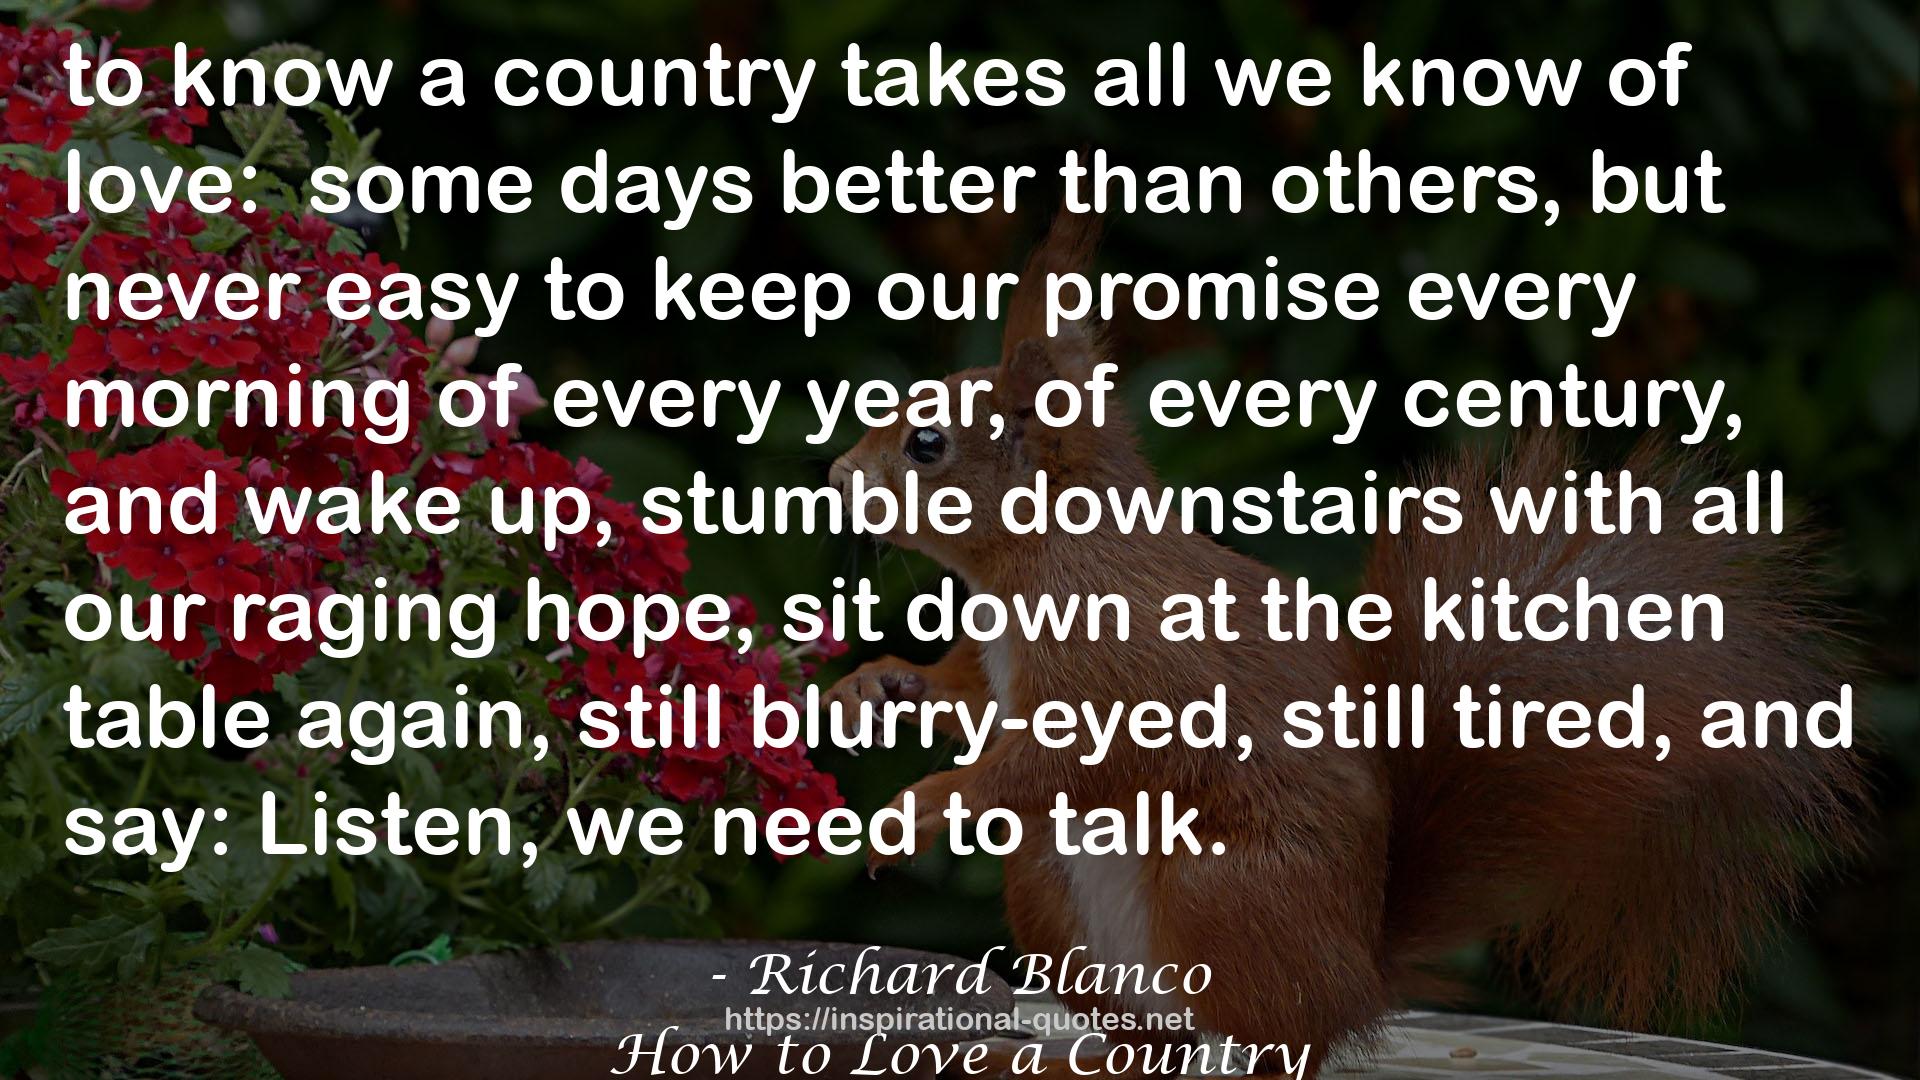 How to Love a Country QUOTES